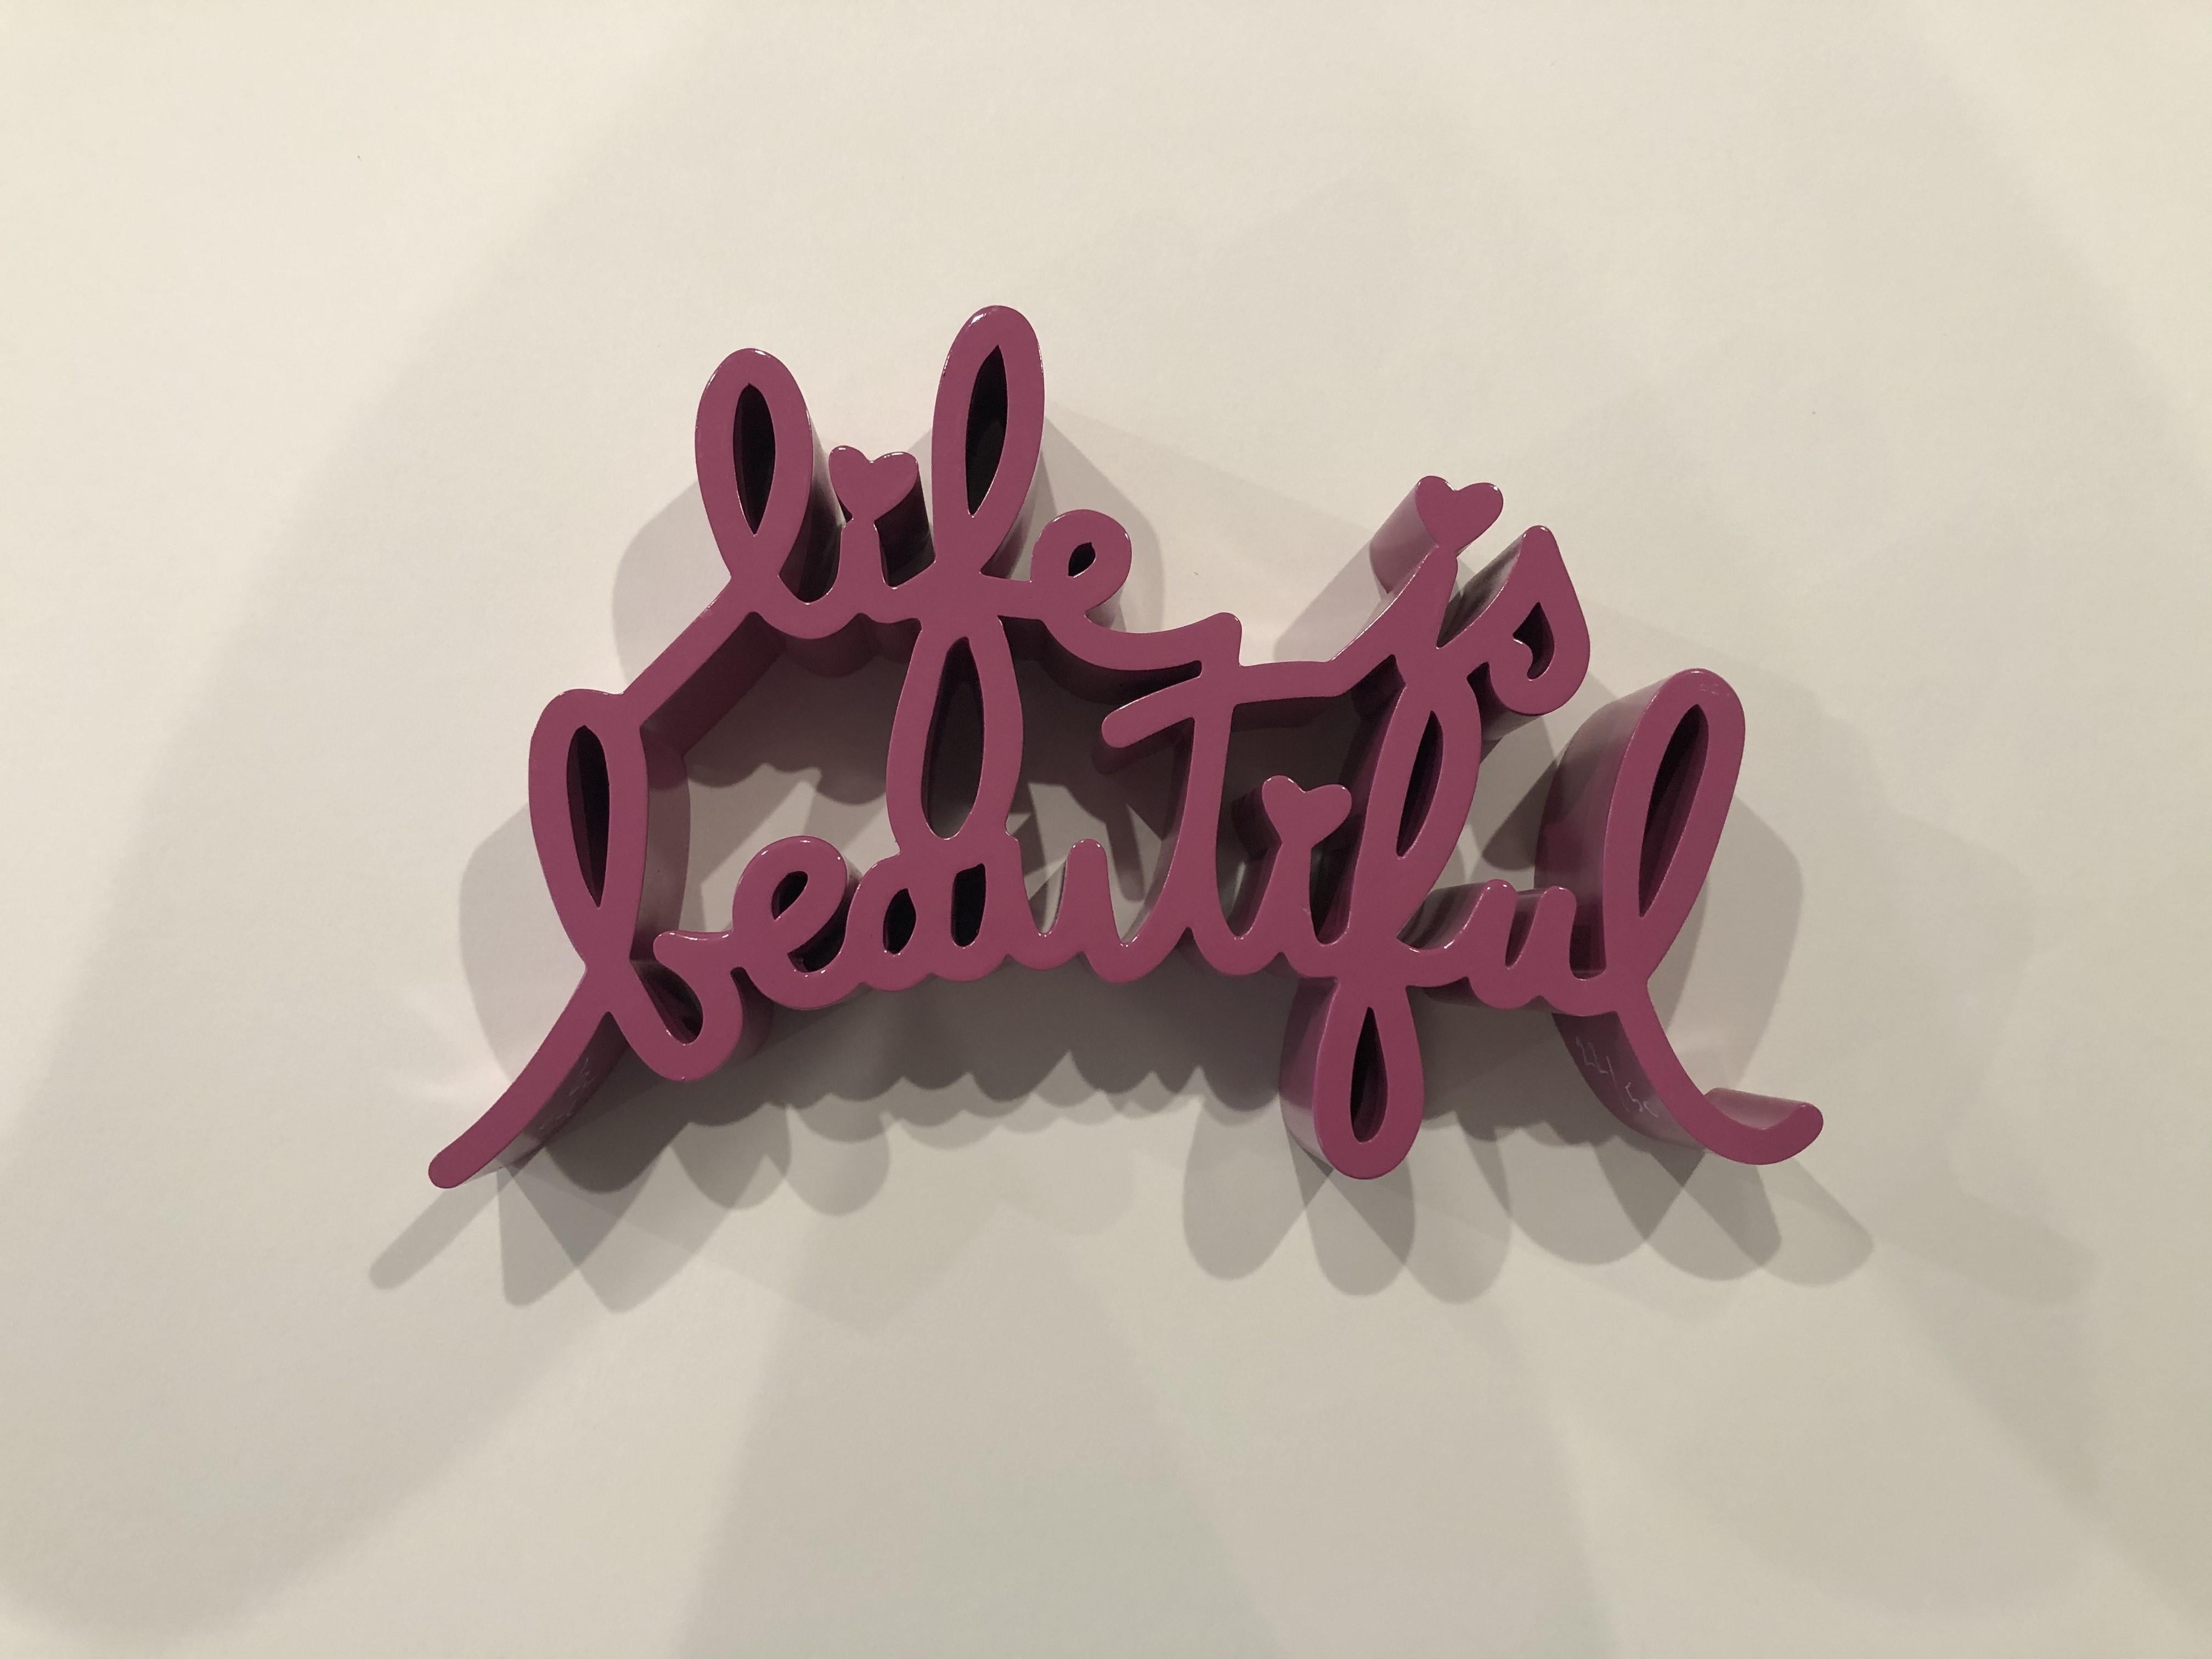 Life is Beautiful (Pink) - Sculpture by Mr. Brainwash